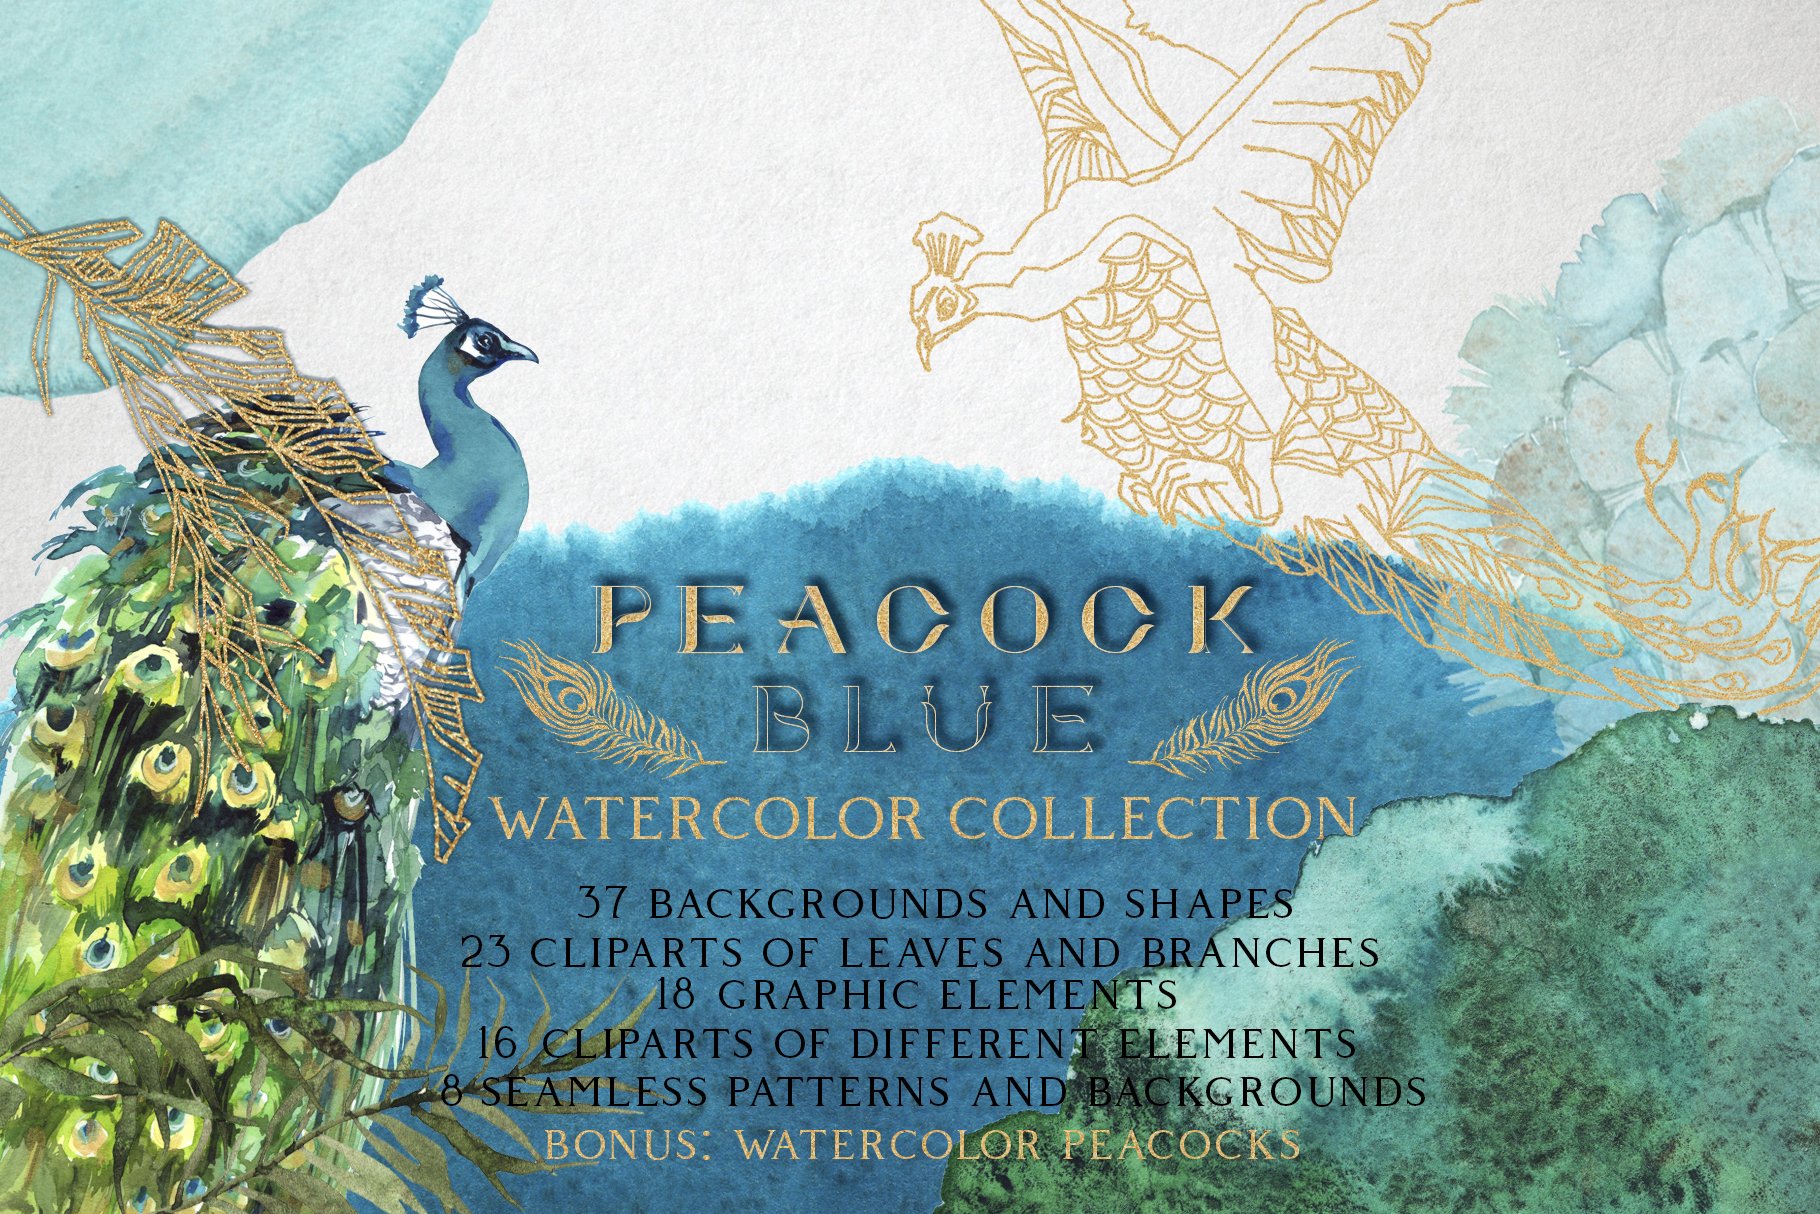 Peacock Blue Watercolor Collection cover image.